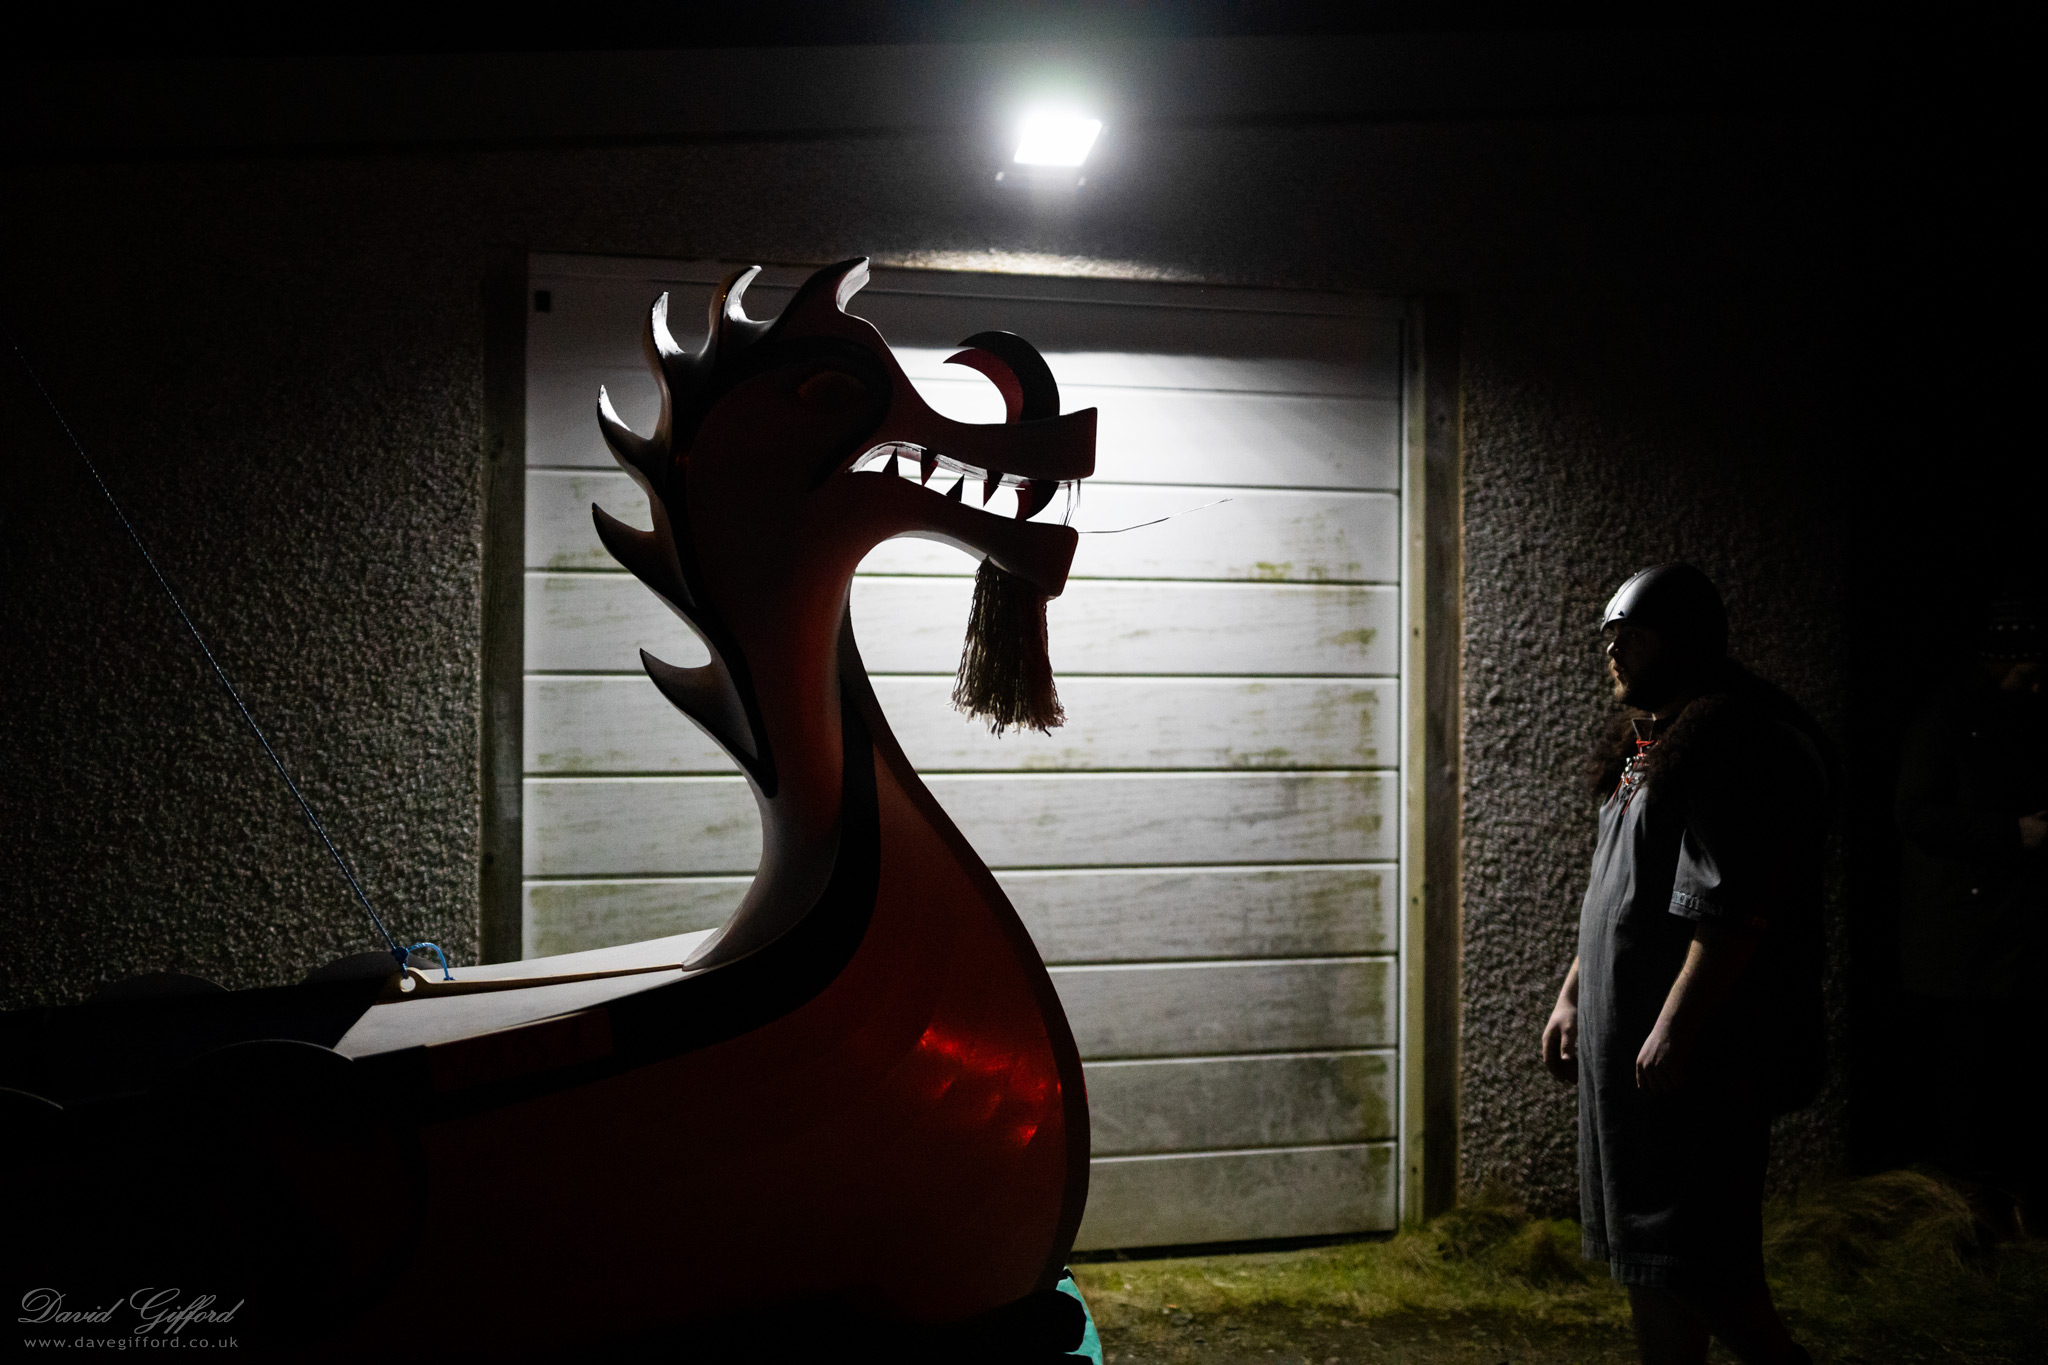 Photo: Nesting and Girlsta Up Helly Aa 2020: Dragon Head